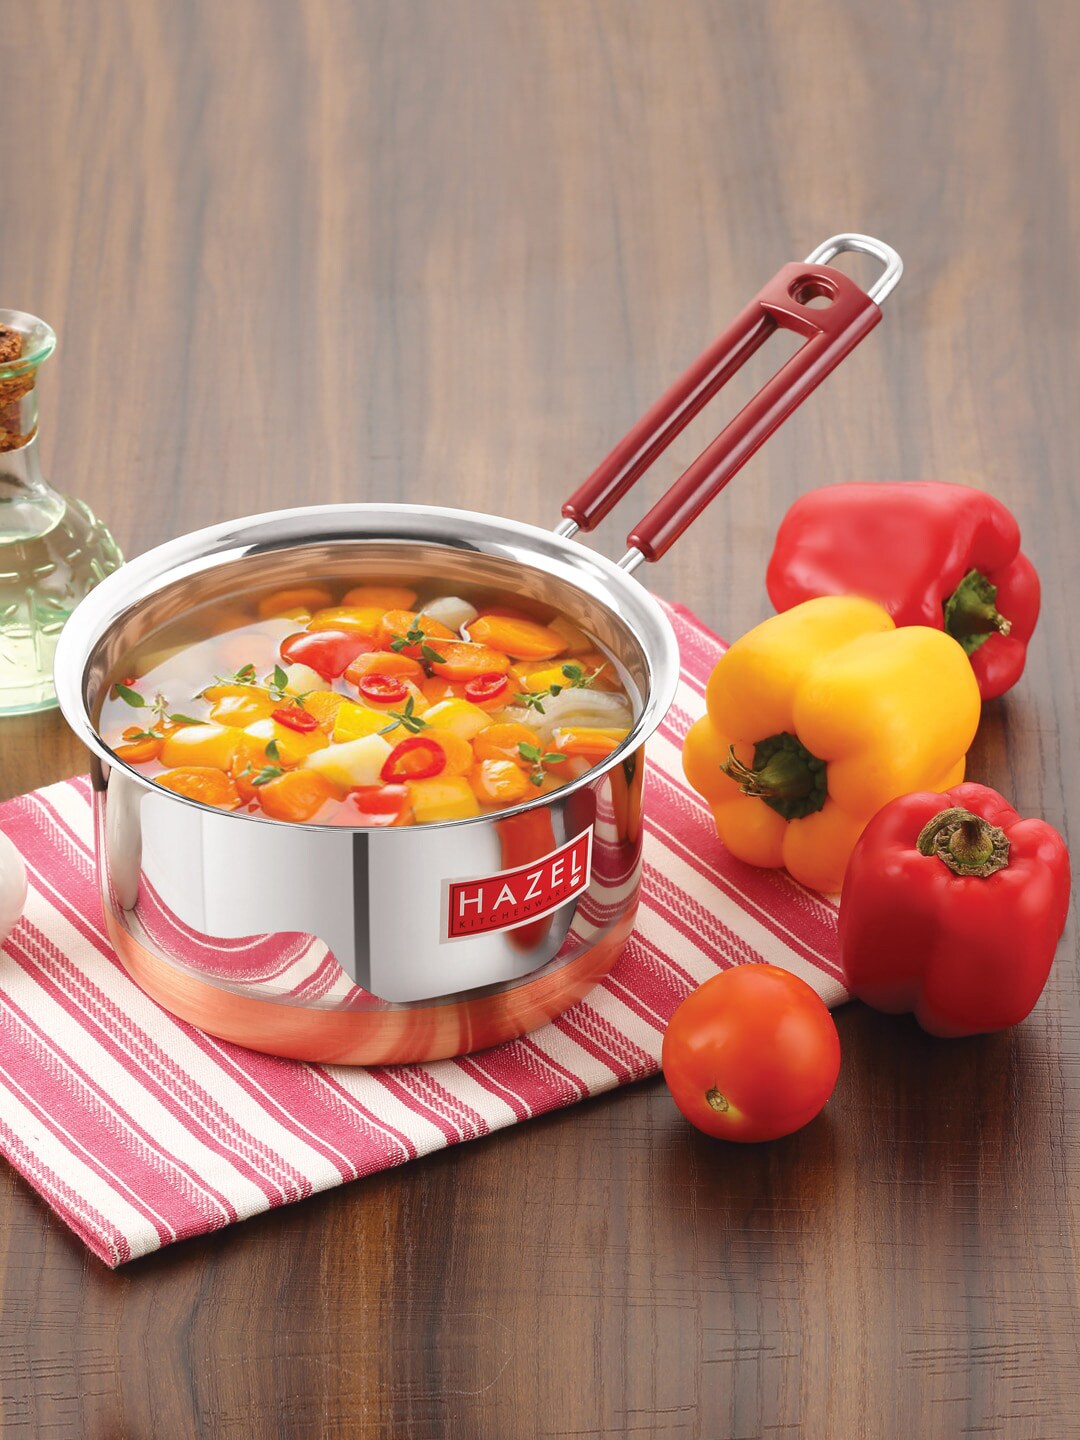 HAZEL Silver-Toned Stainless Steel Saucepan Price in India